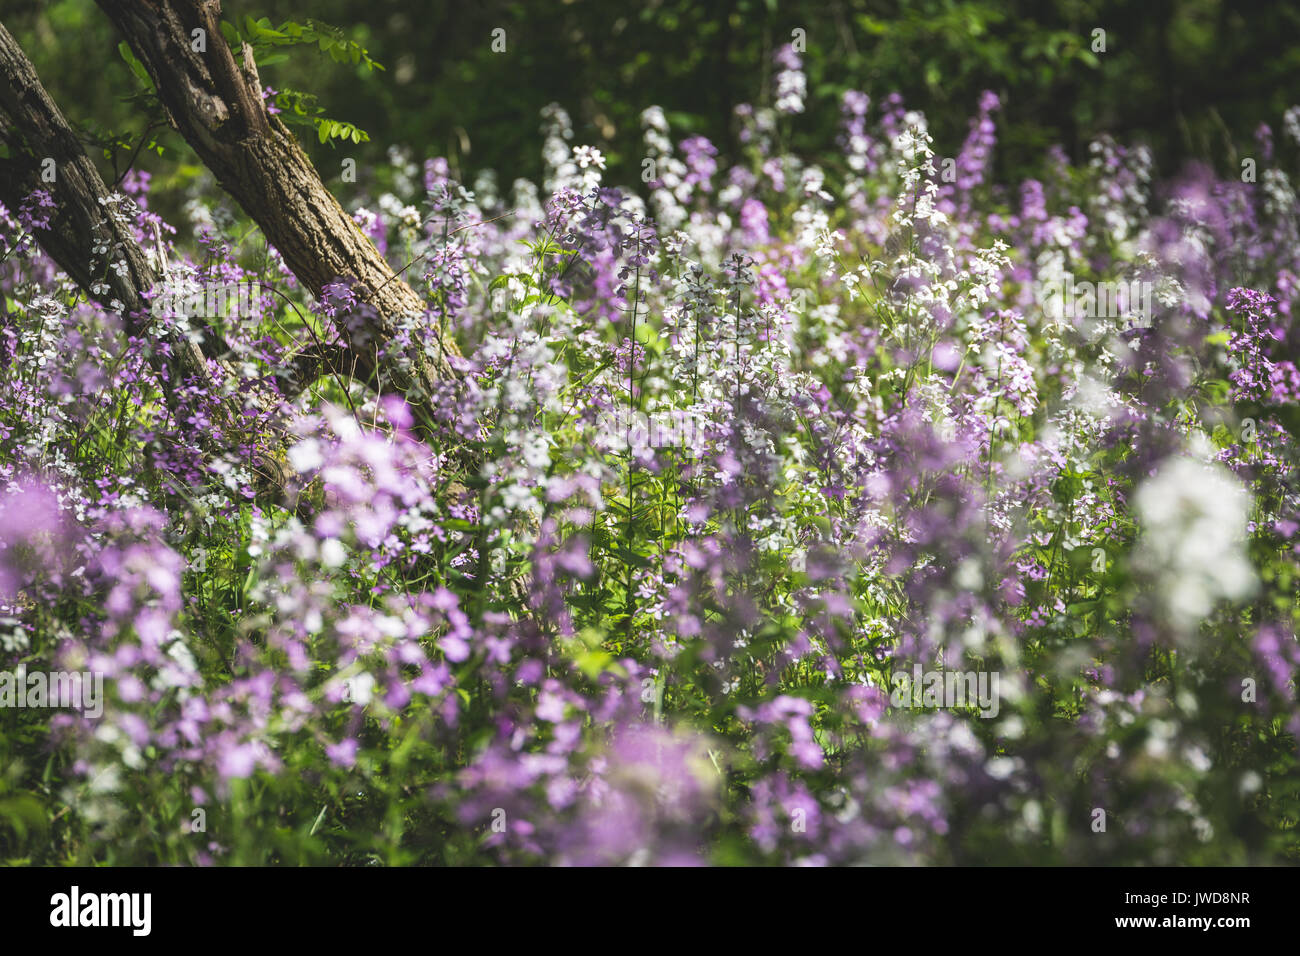 White and purple wildflowers grow in the shade of a forest in ...